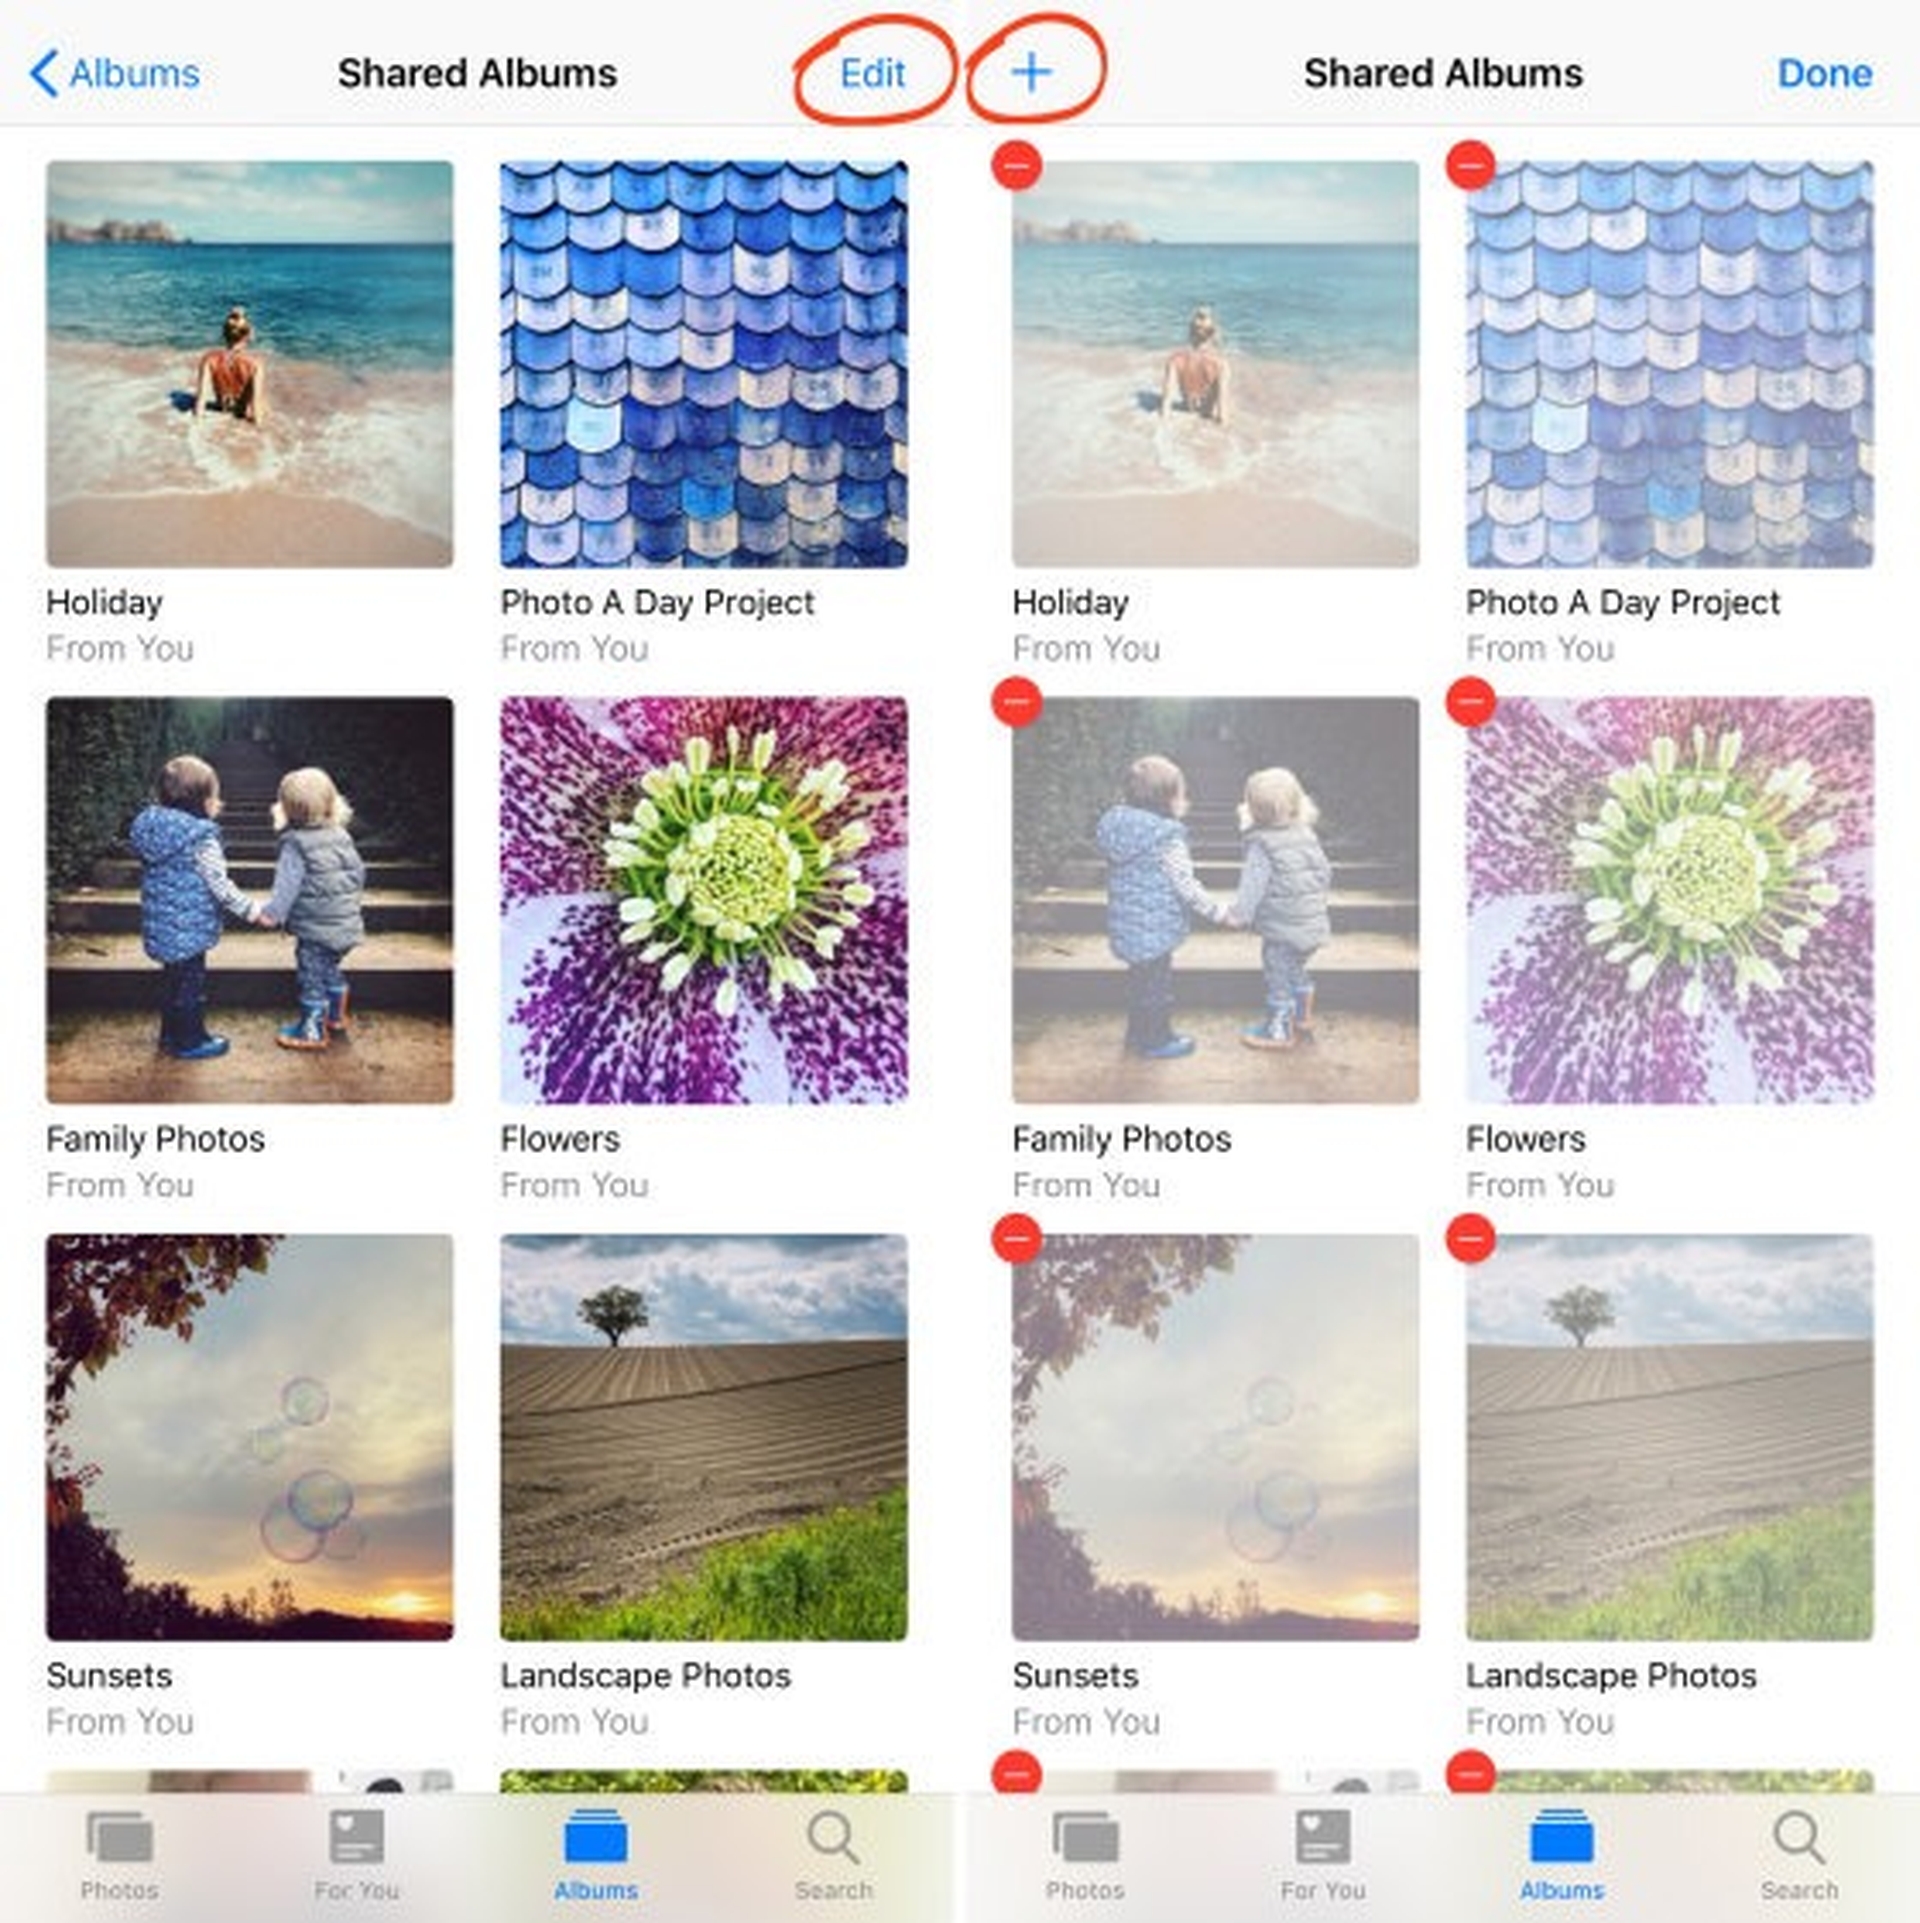 In this article, we are going to tell you how to comment on shared photo albums on iPhone, which is a built-in feature that not many knows about.